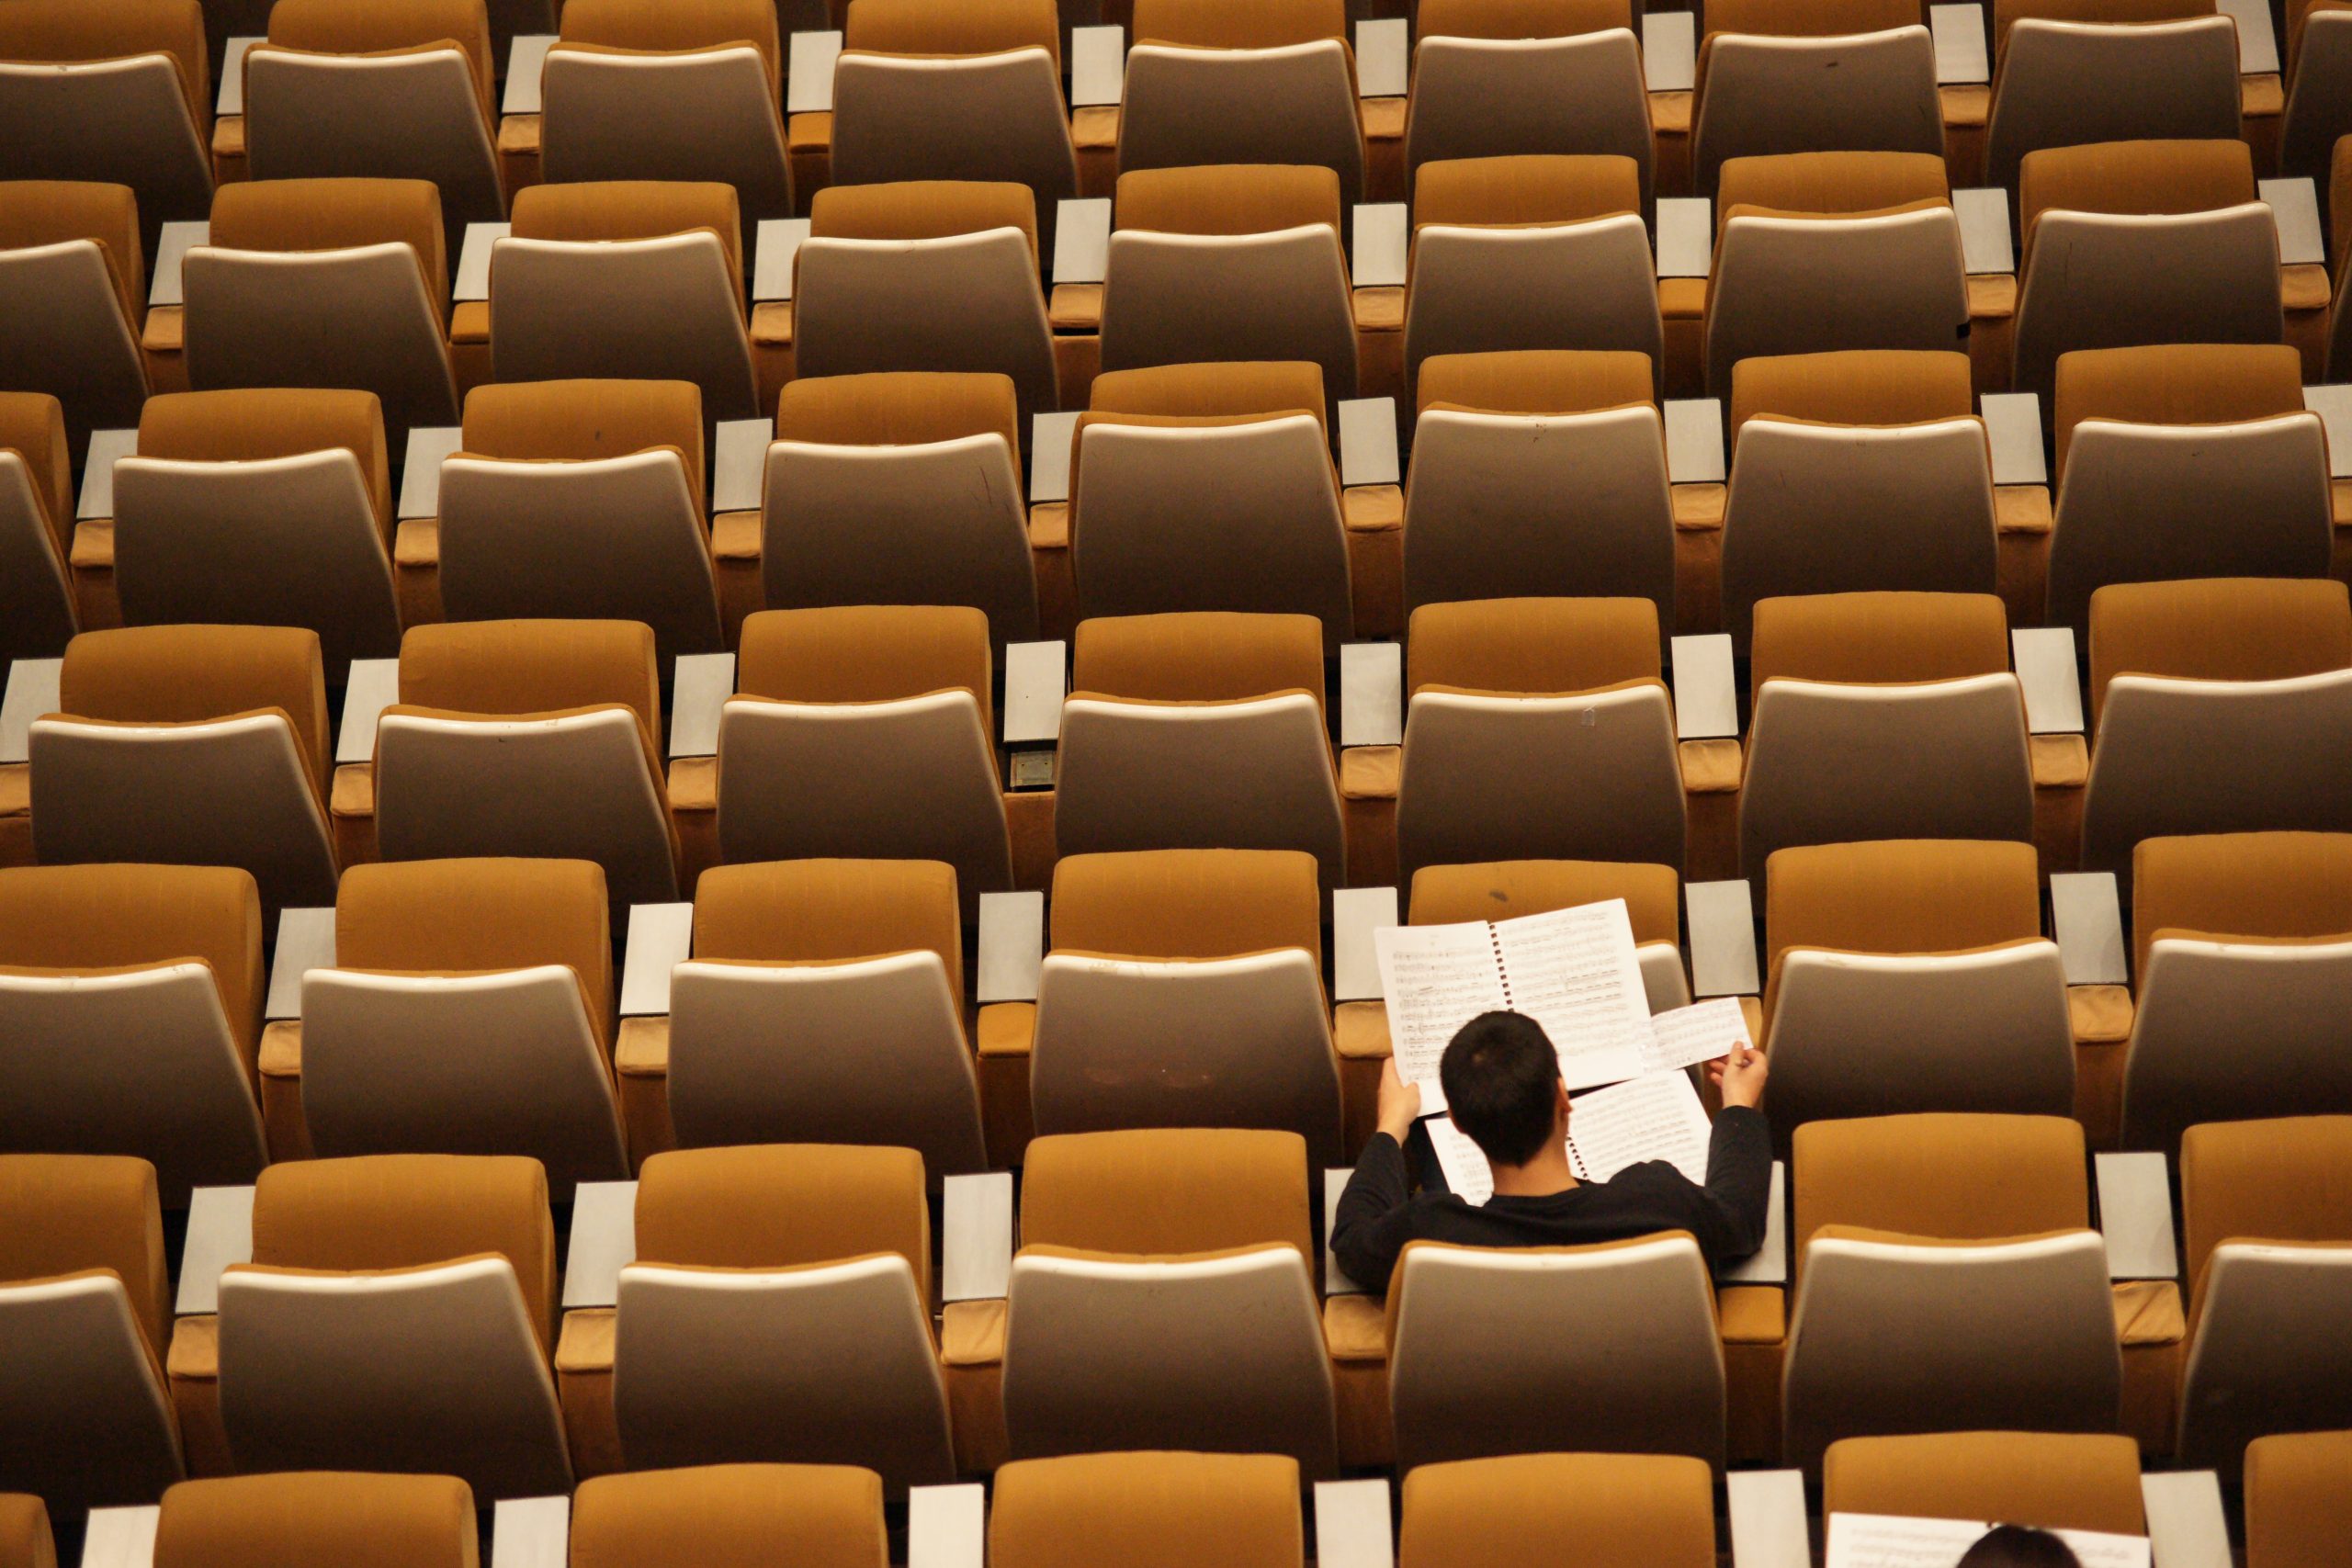 A lone student sitting in a lecture seat from bird's eye view.